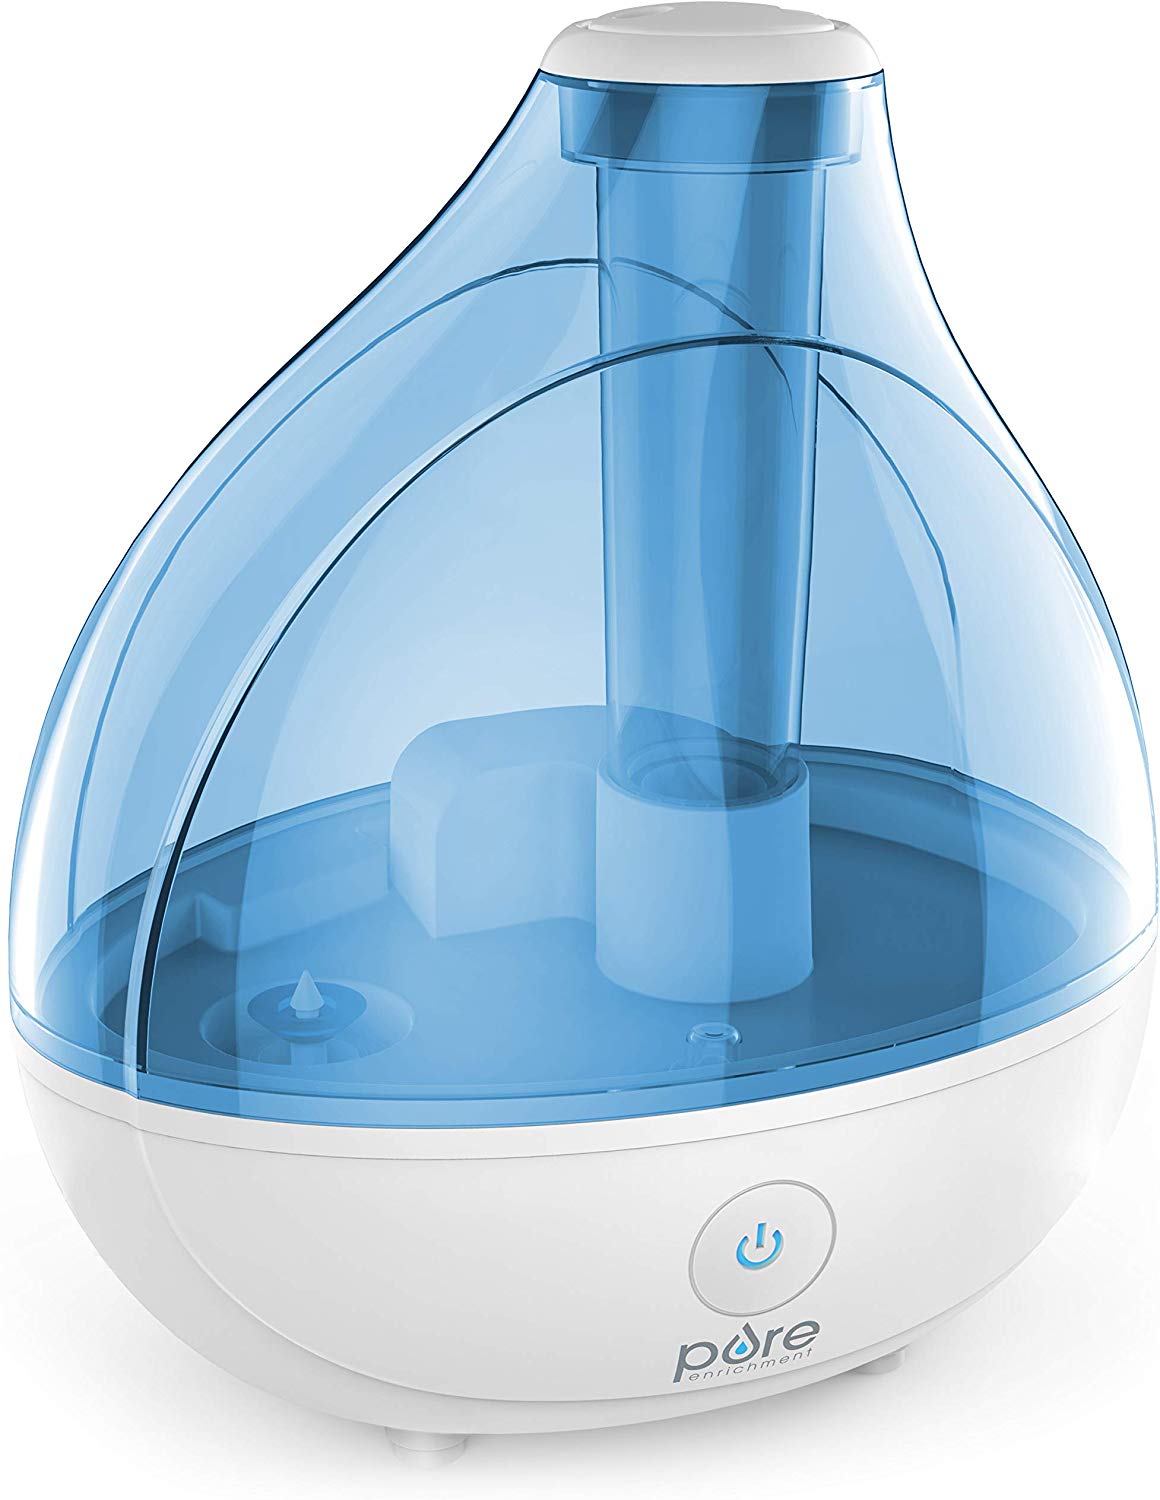 Pure Enrichment MistAire Ultrasonic Cool Mist Humidifier​